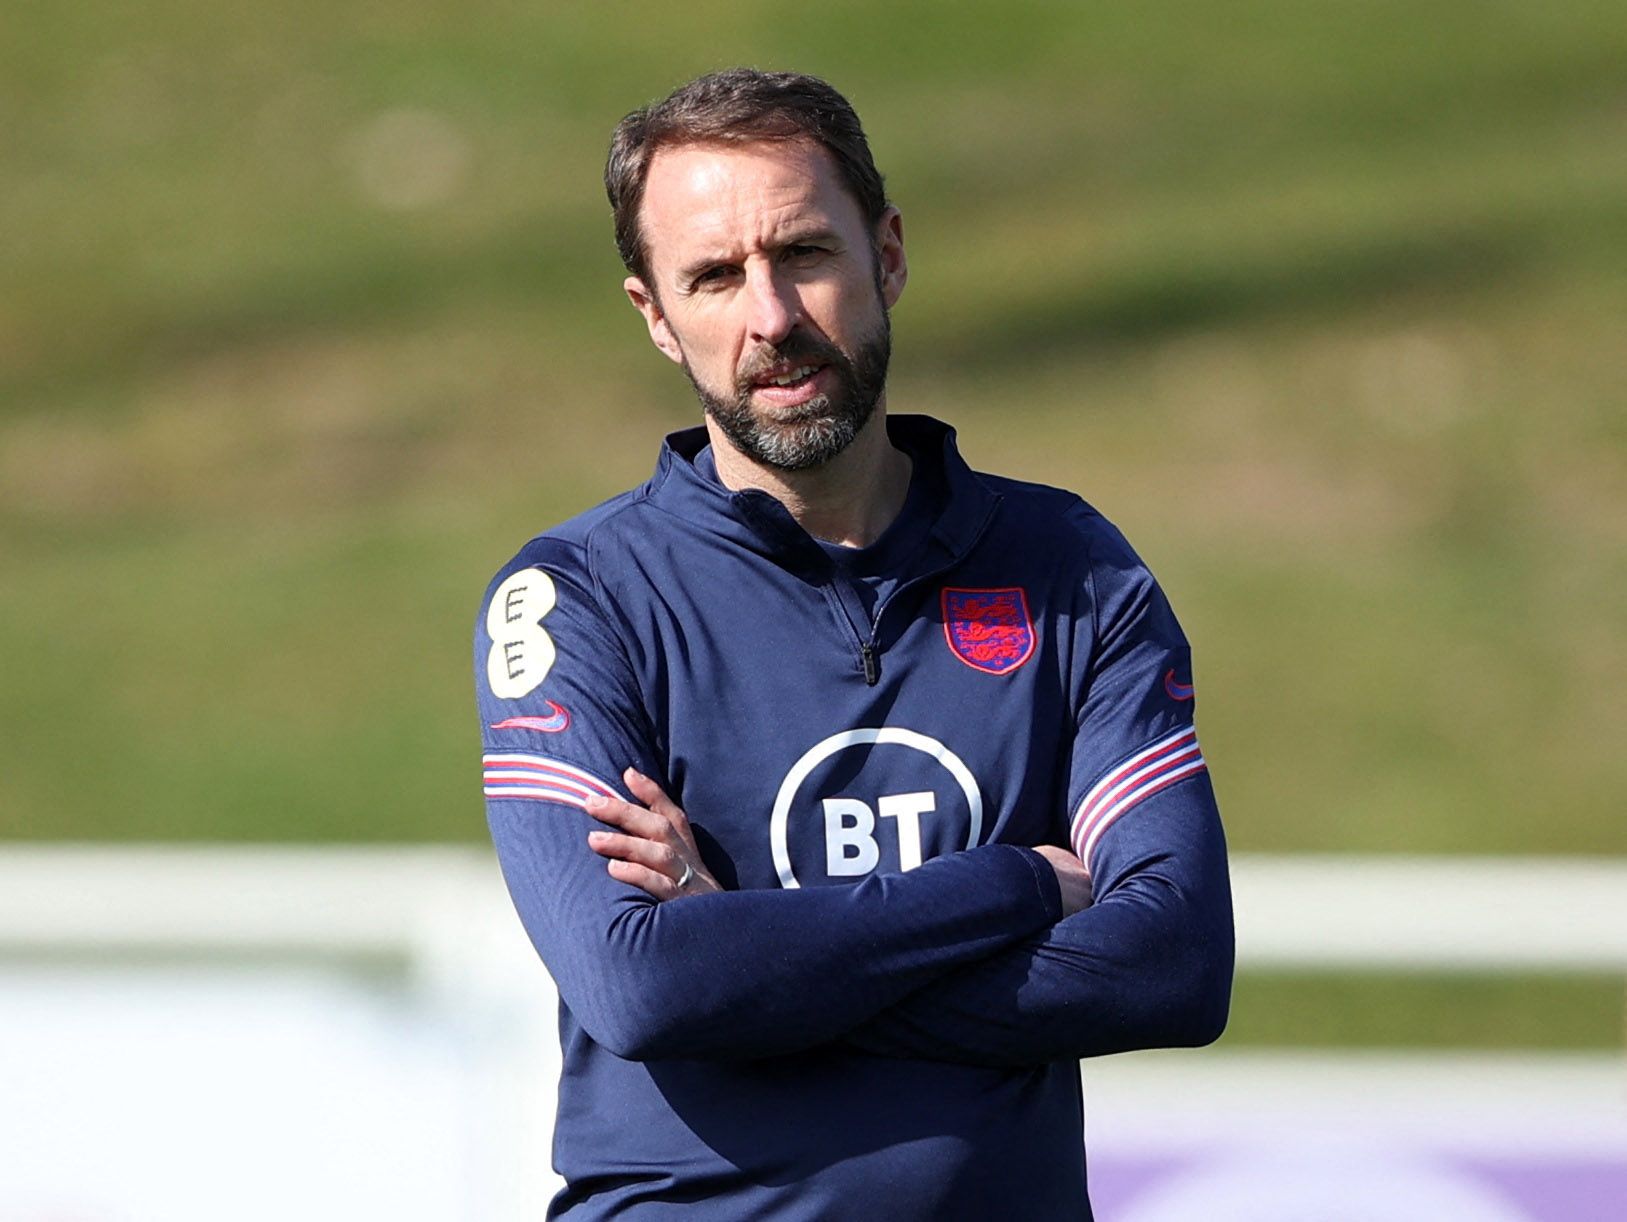 Southgate watches on during an England training session.